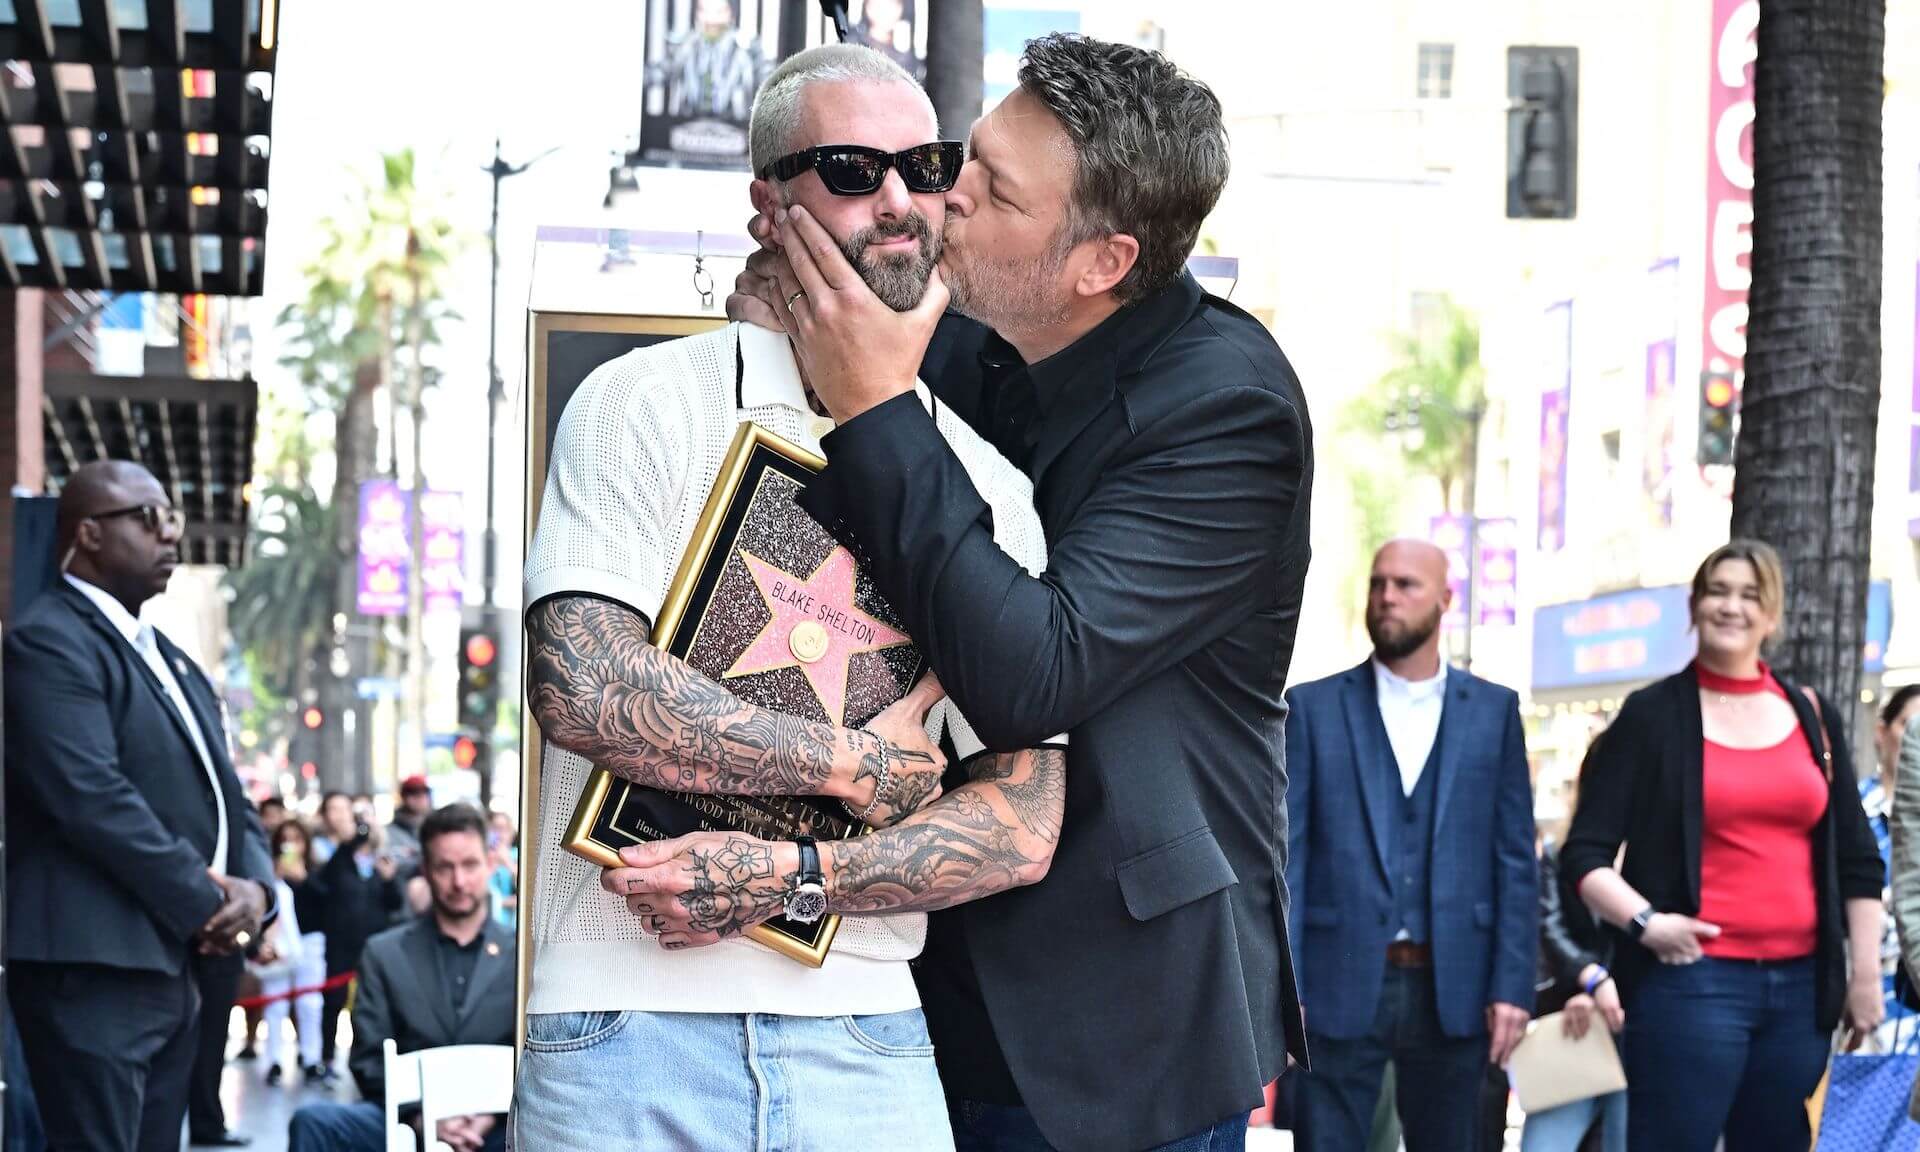 'The Voice' coach Blake Shelton kissing Adam Levine on the cheek at Shelton's Hollywood Walk of Fame ceremony